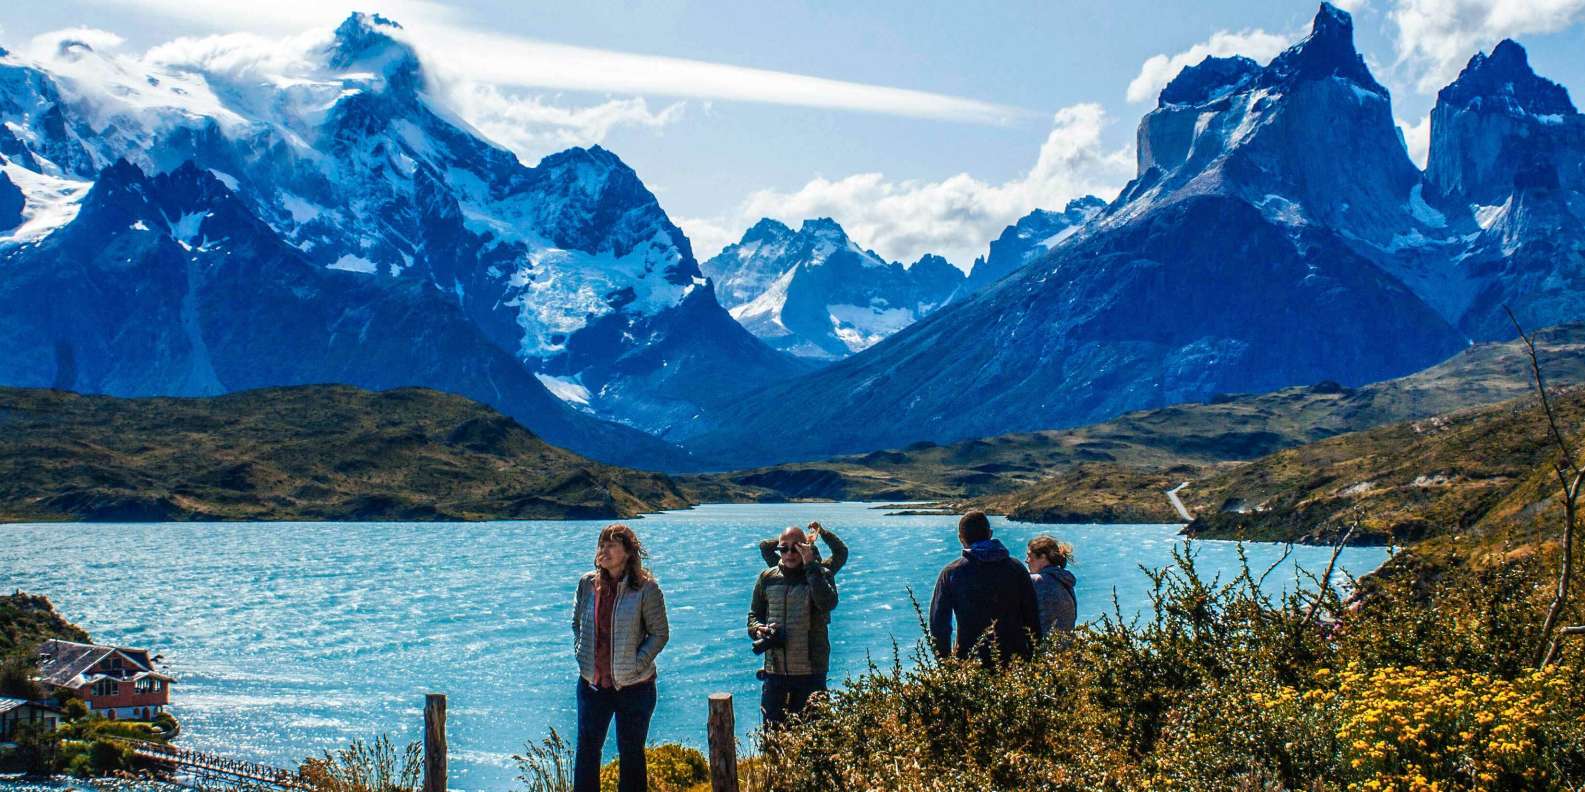 What to do in Puerto Natales